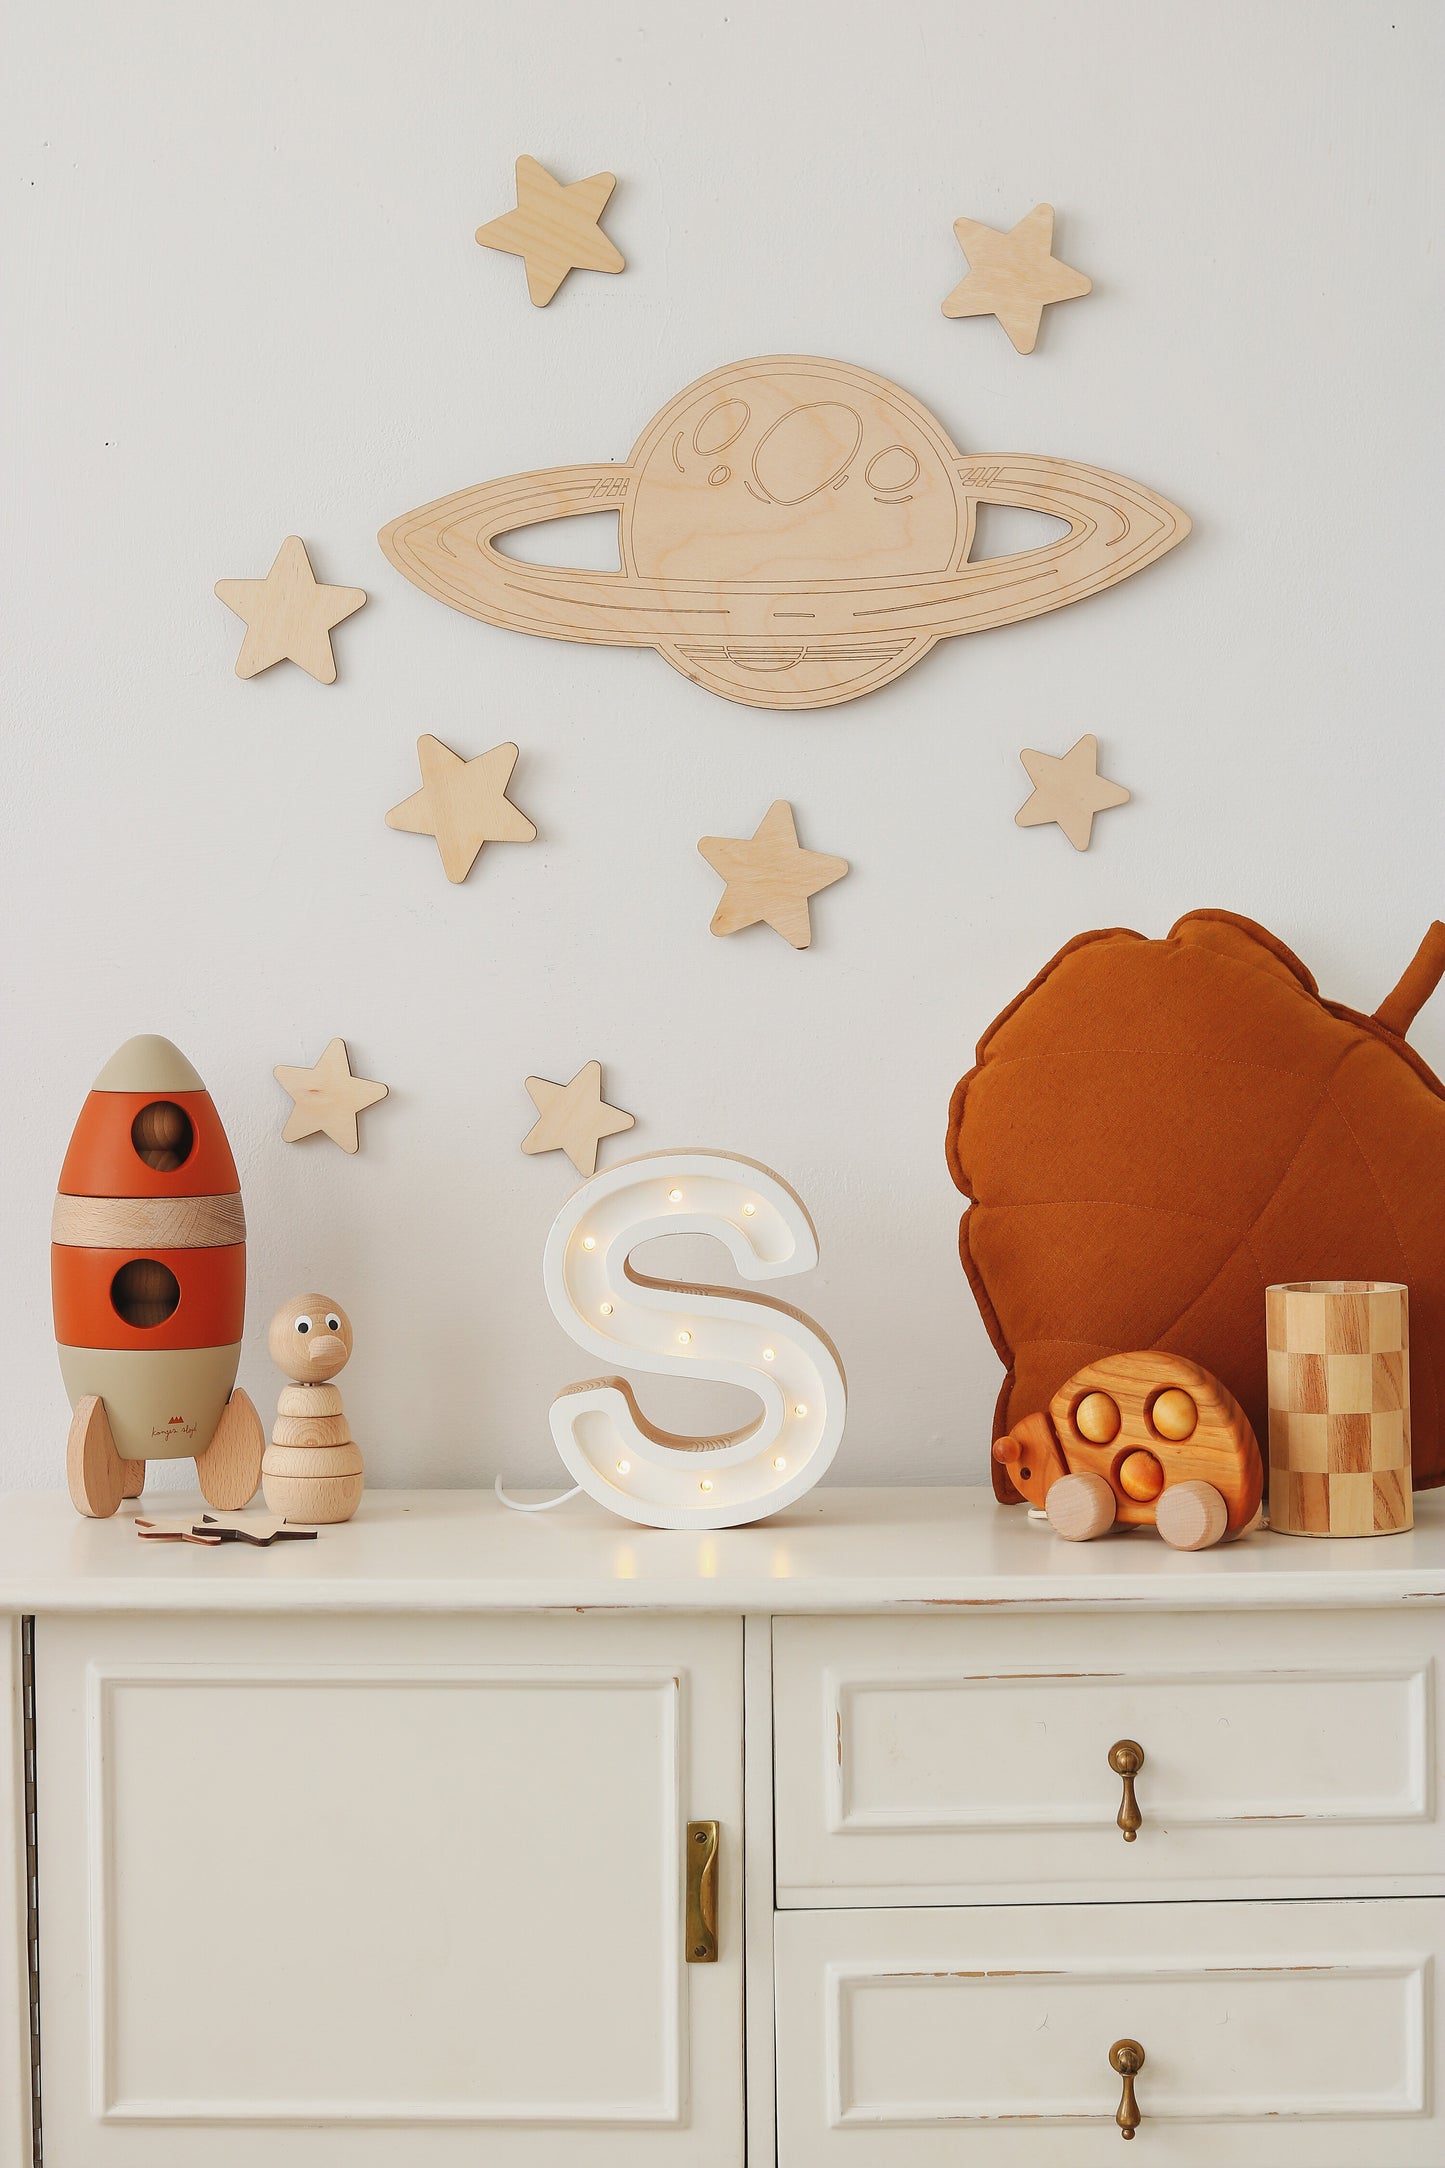 Space Wall Decoration